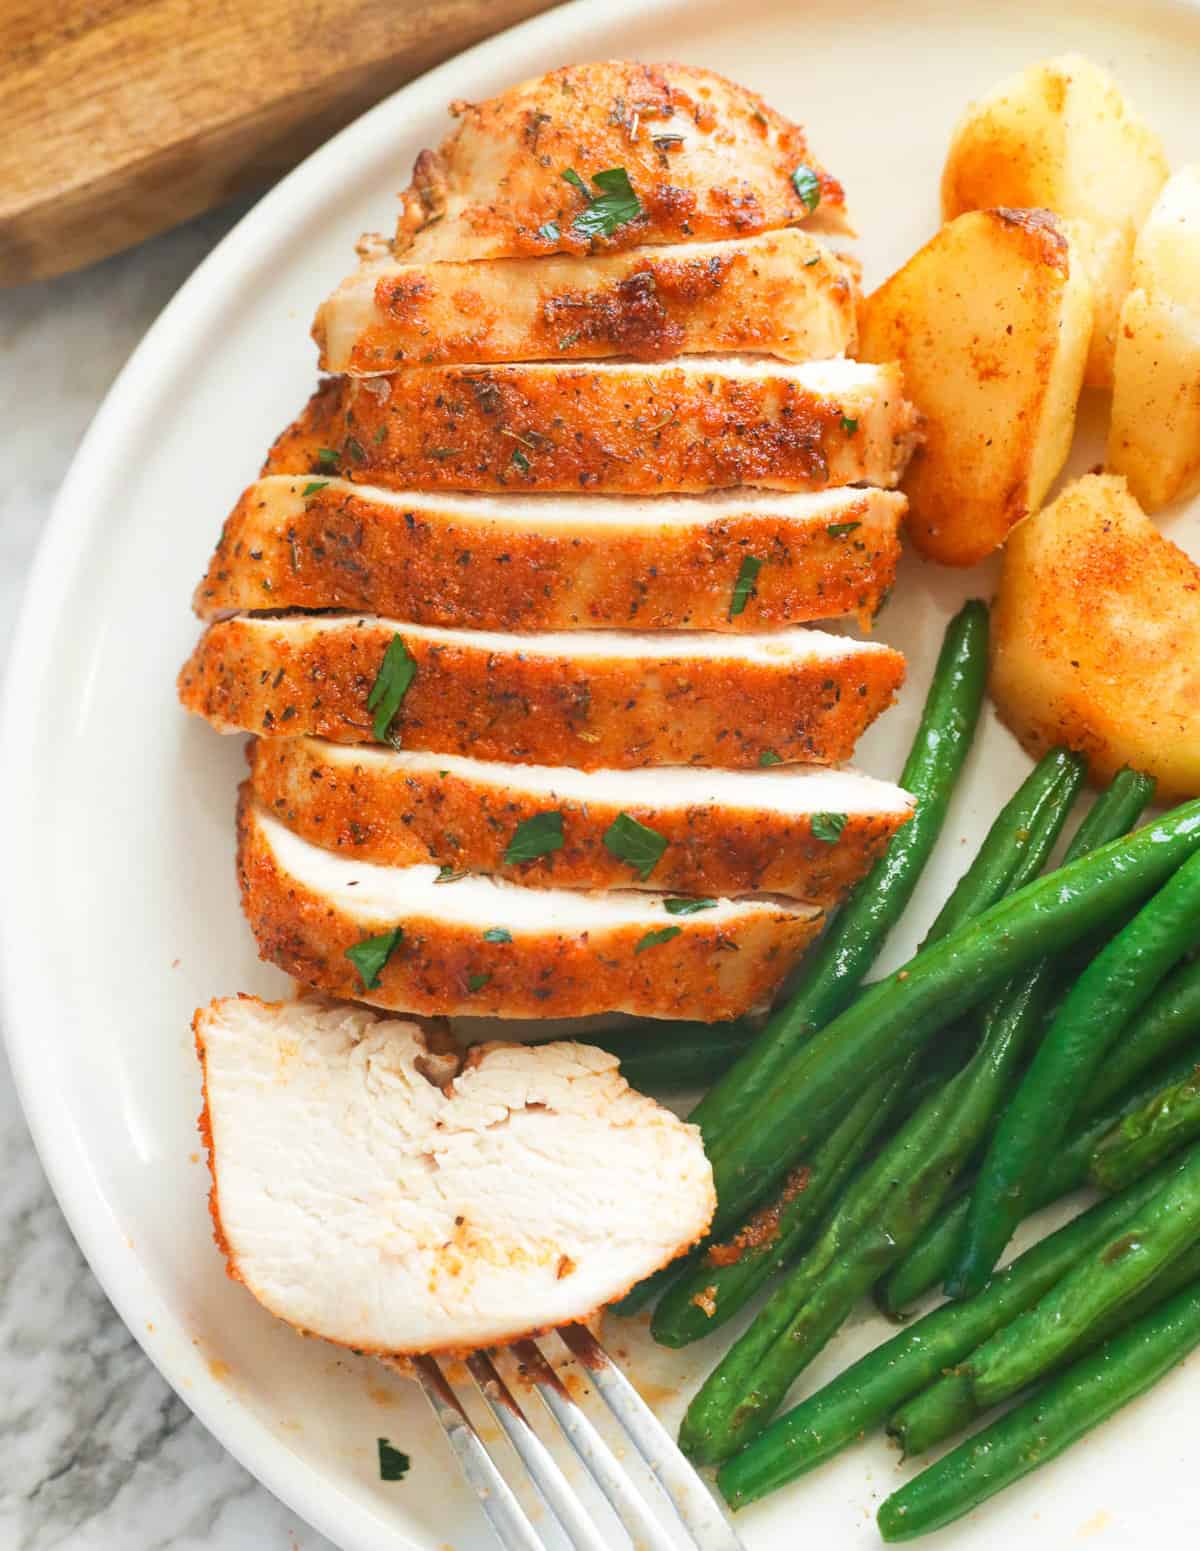 Enjoy grilled chicken breast with green beans and roast potatoes